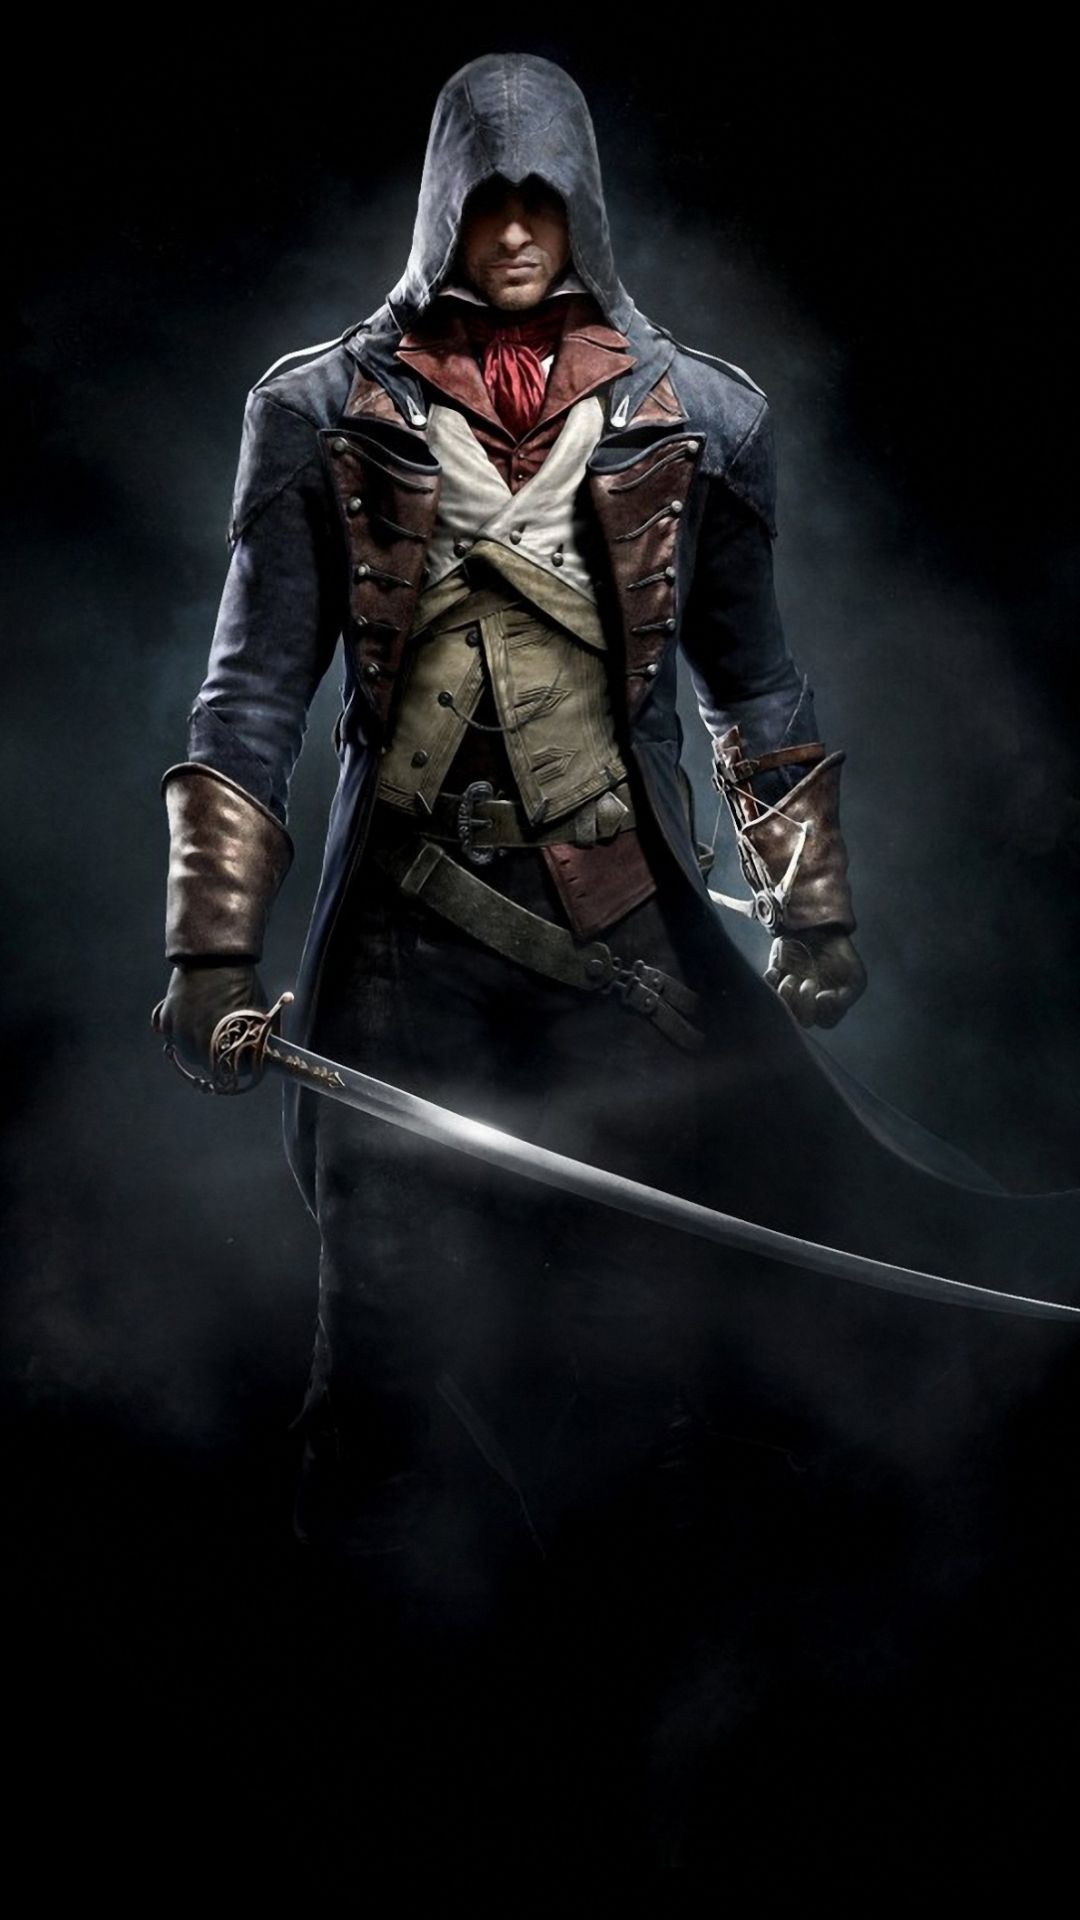 Best 40+ Assasins Creed iPhone Backgrounds on HipWallpapers